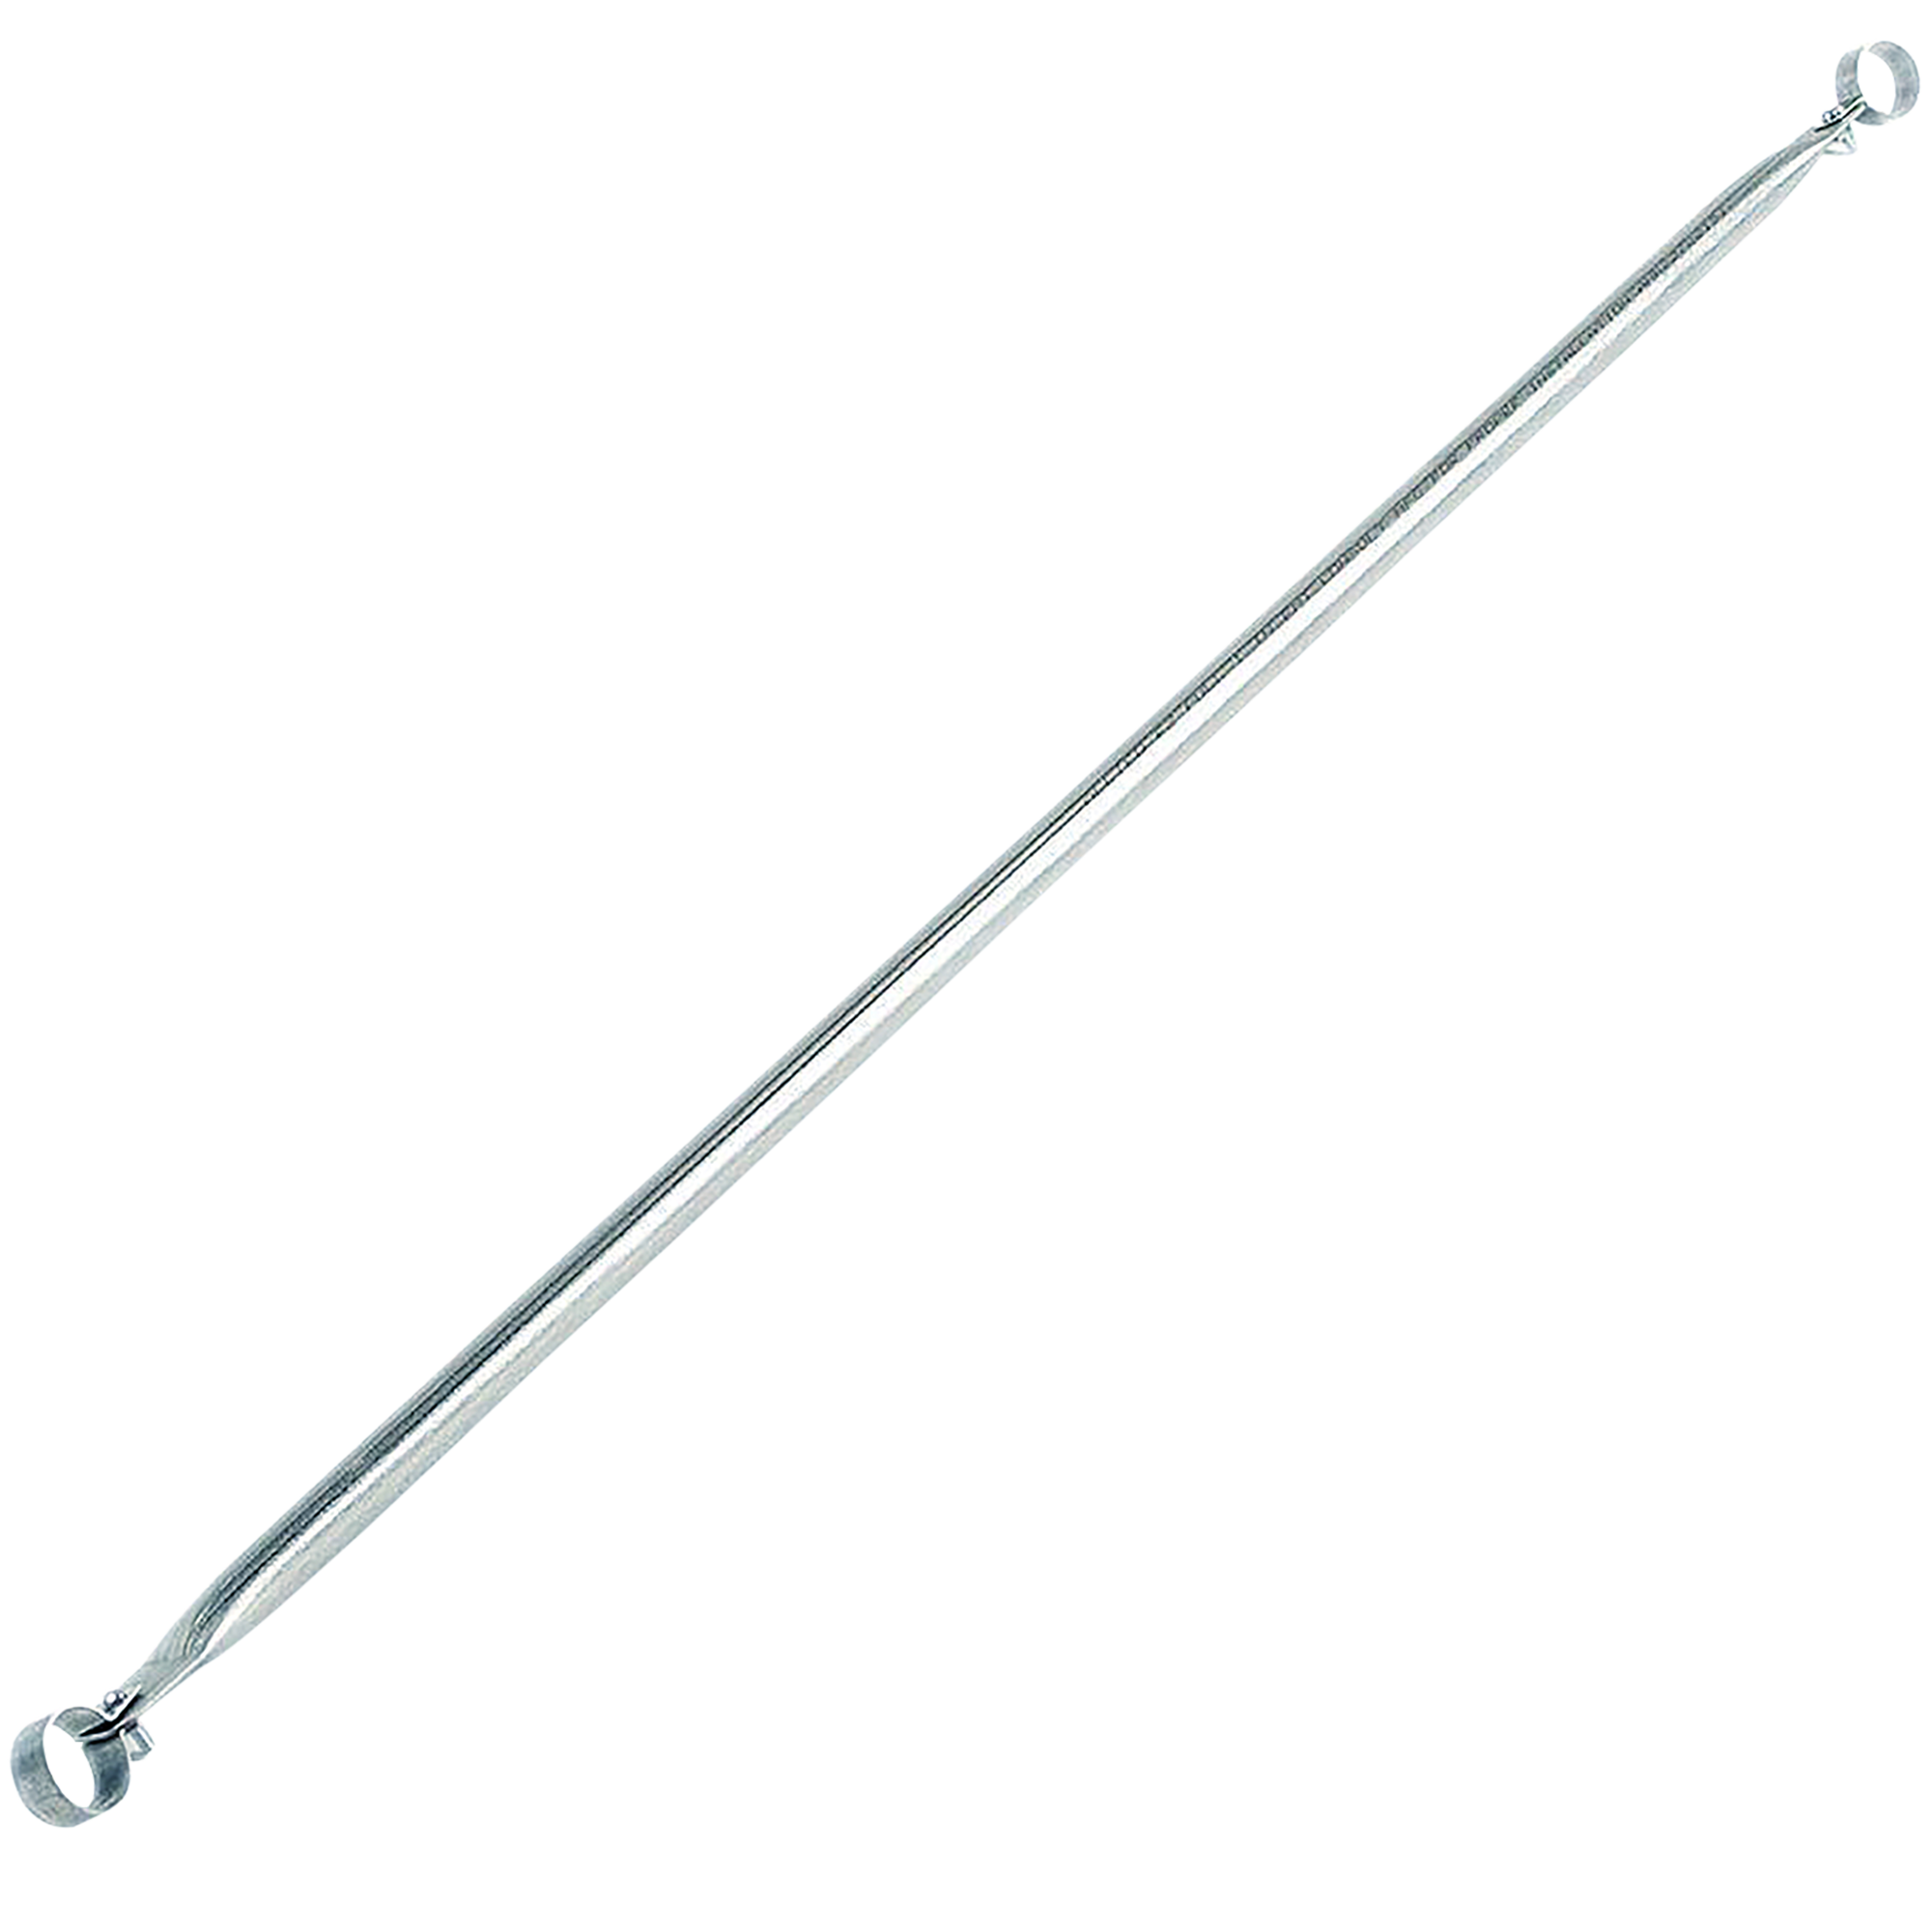 60 in. Long Support Brace Assembly with Attaching Hardware - Heavy Duty